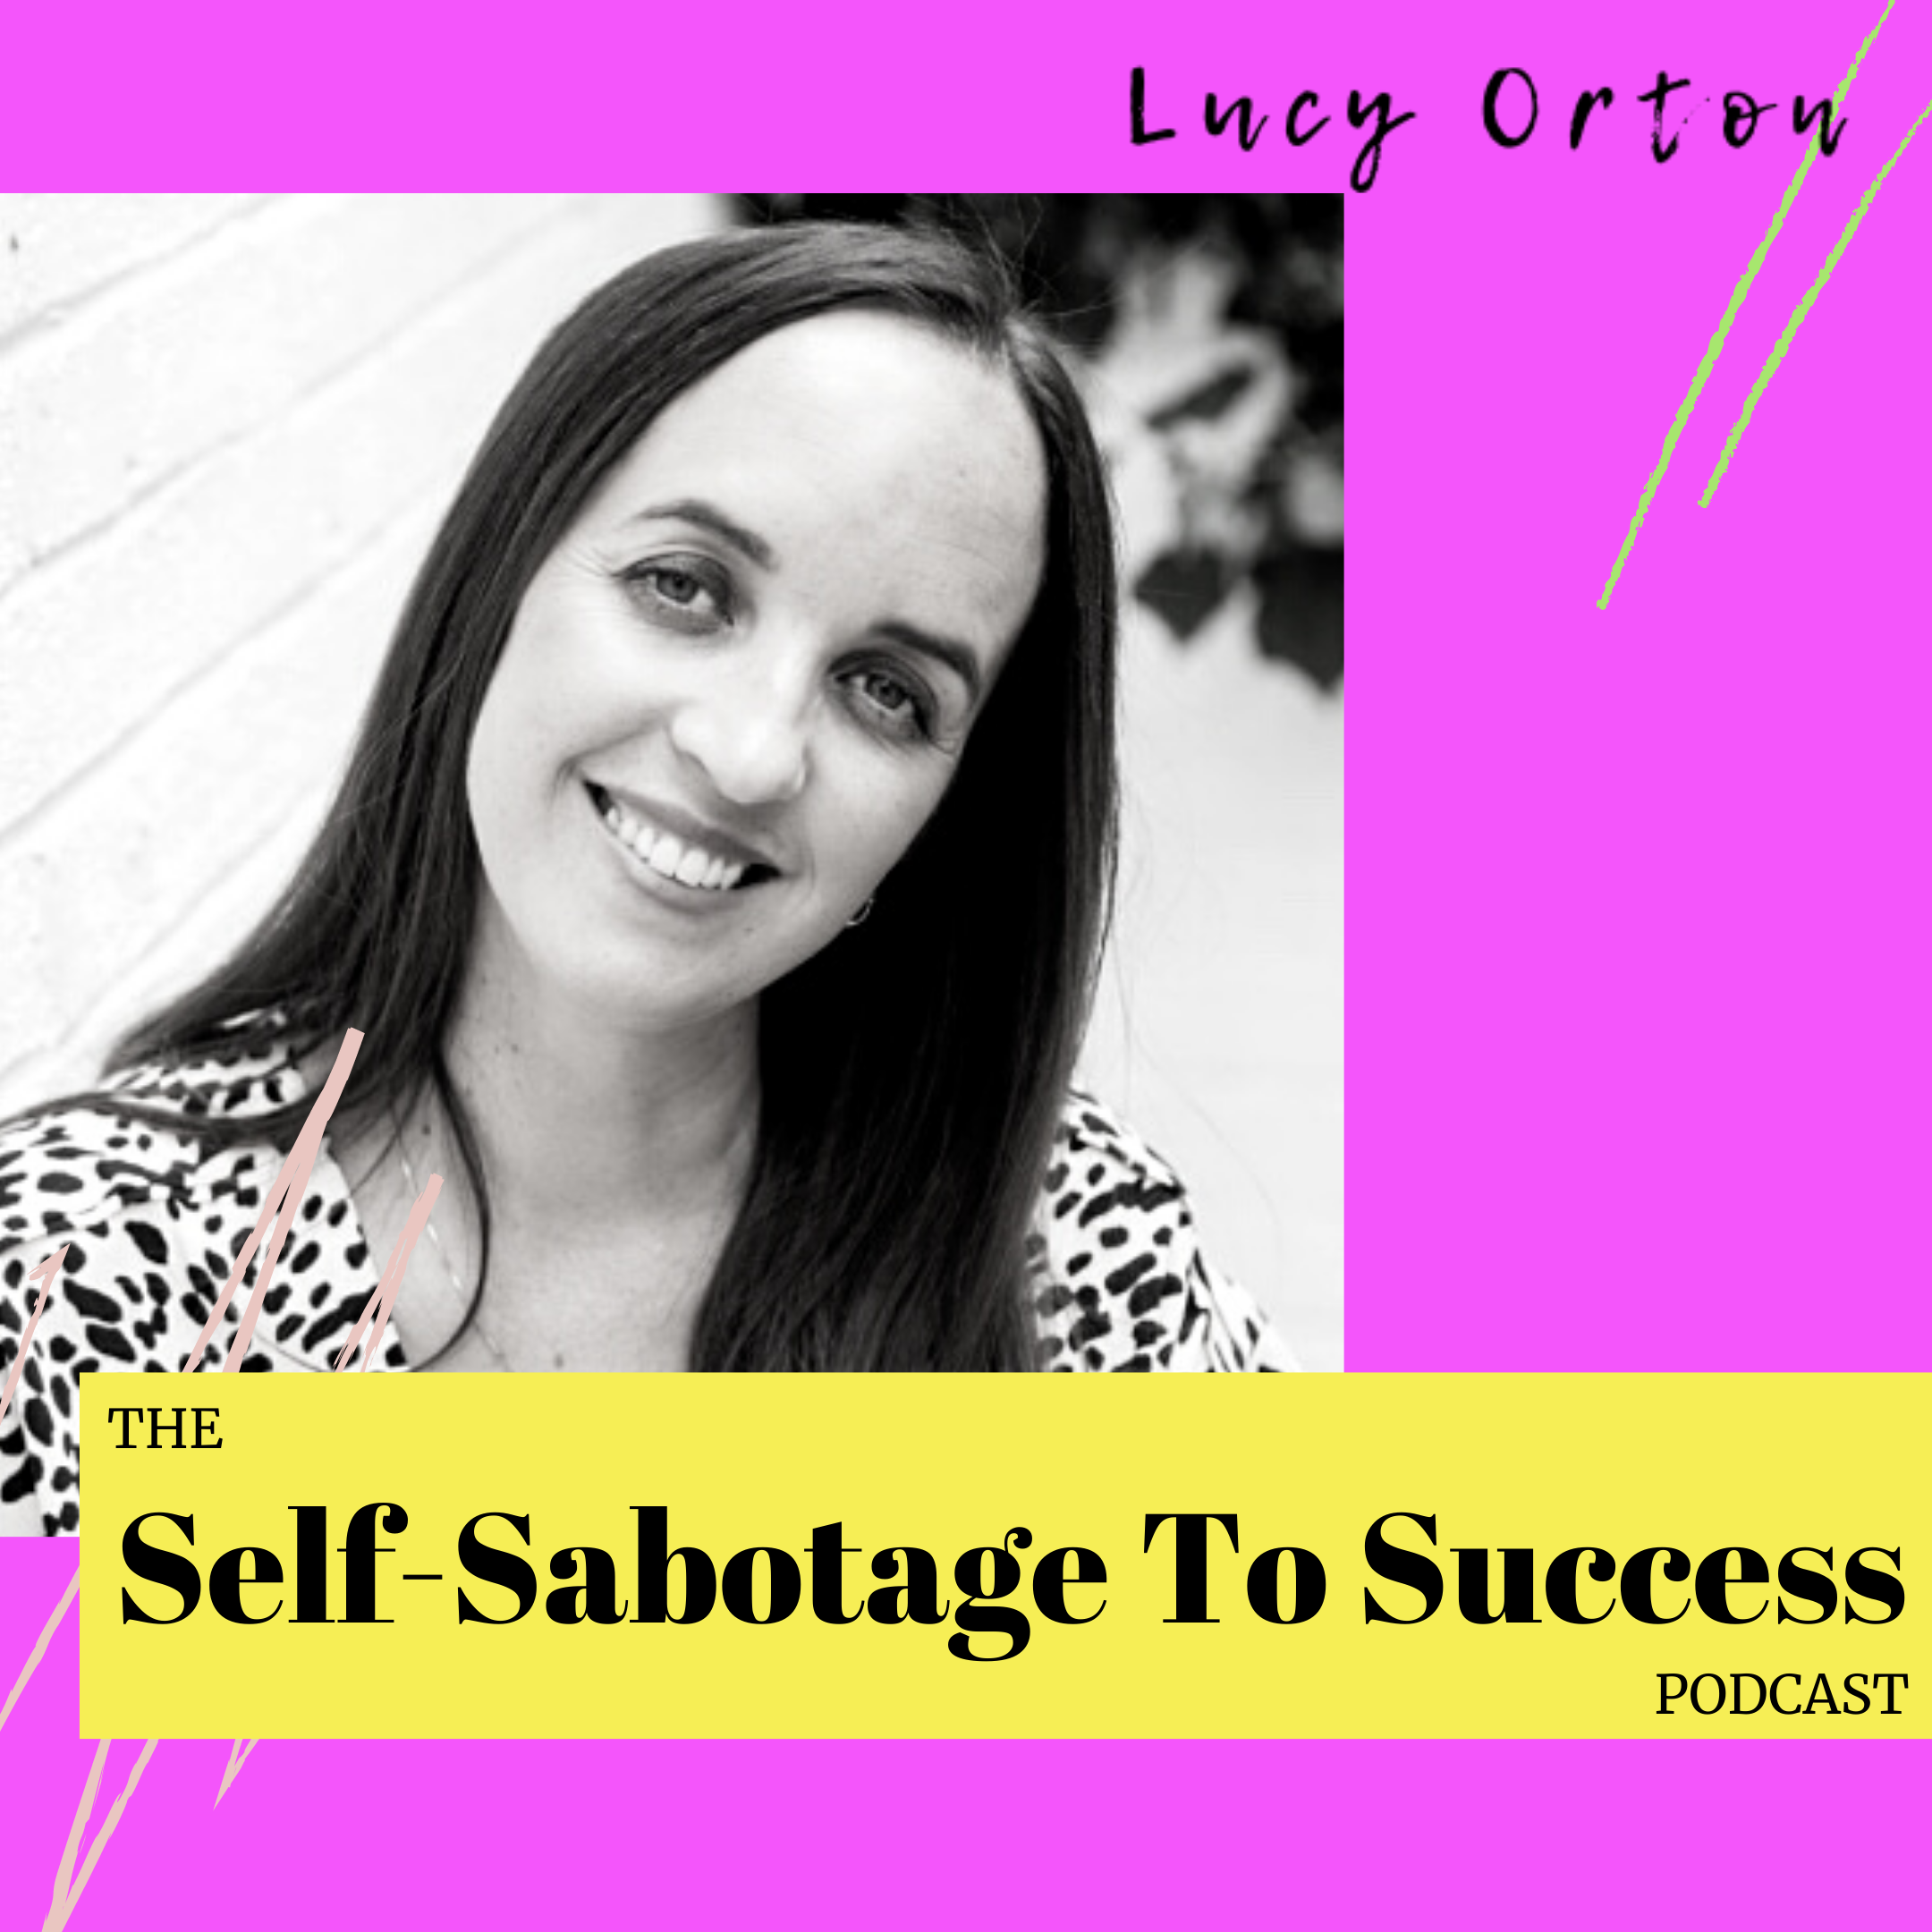 The Self-Sabotage To Success Podcast Introduction